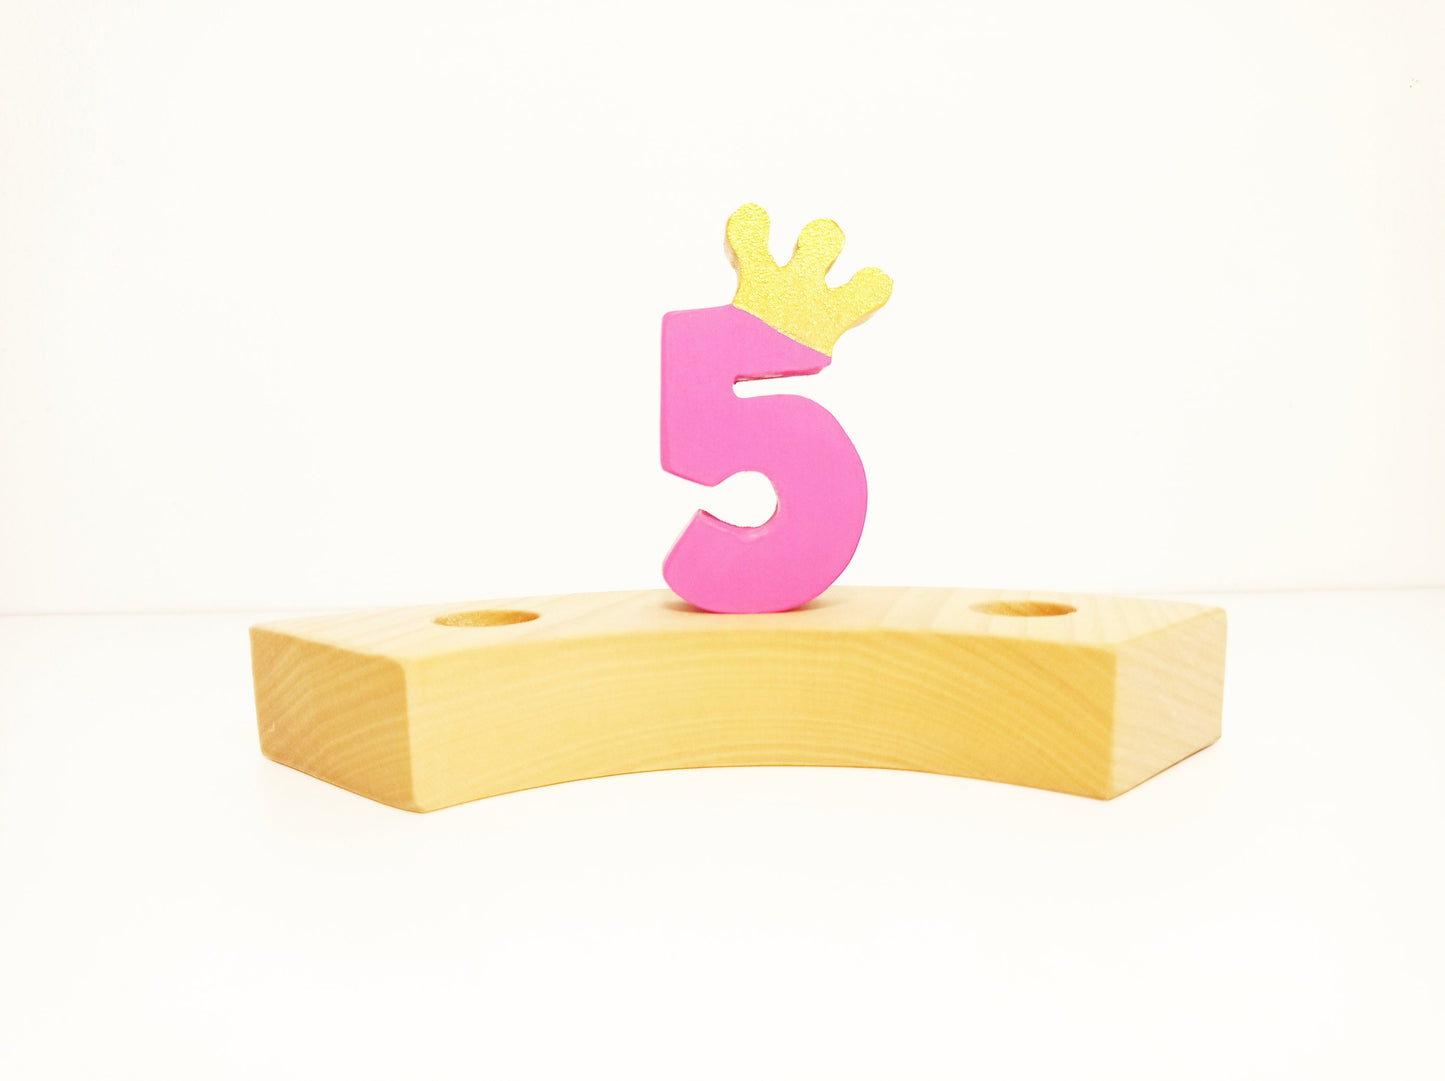 Number 5 birthday ring ornament, waldorf ring ornament, waldorf decoration, birthday ring, birthday decorations, waldorf numbers, jaar ring